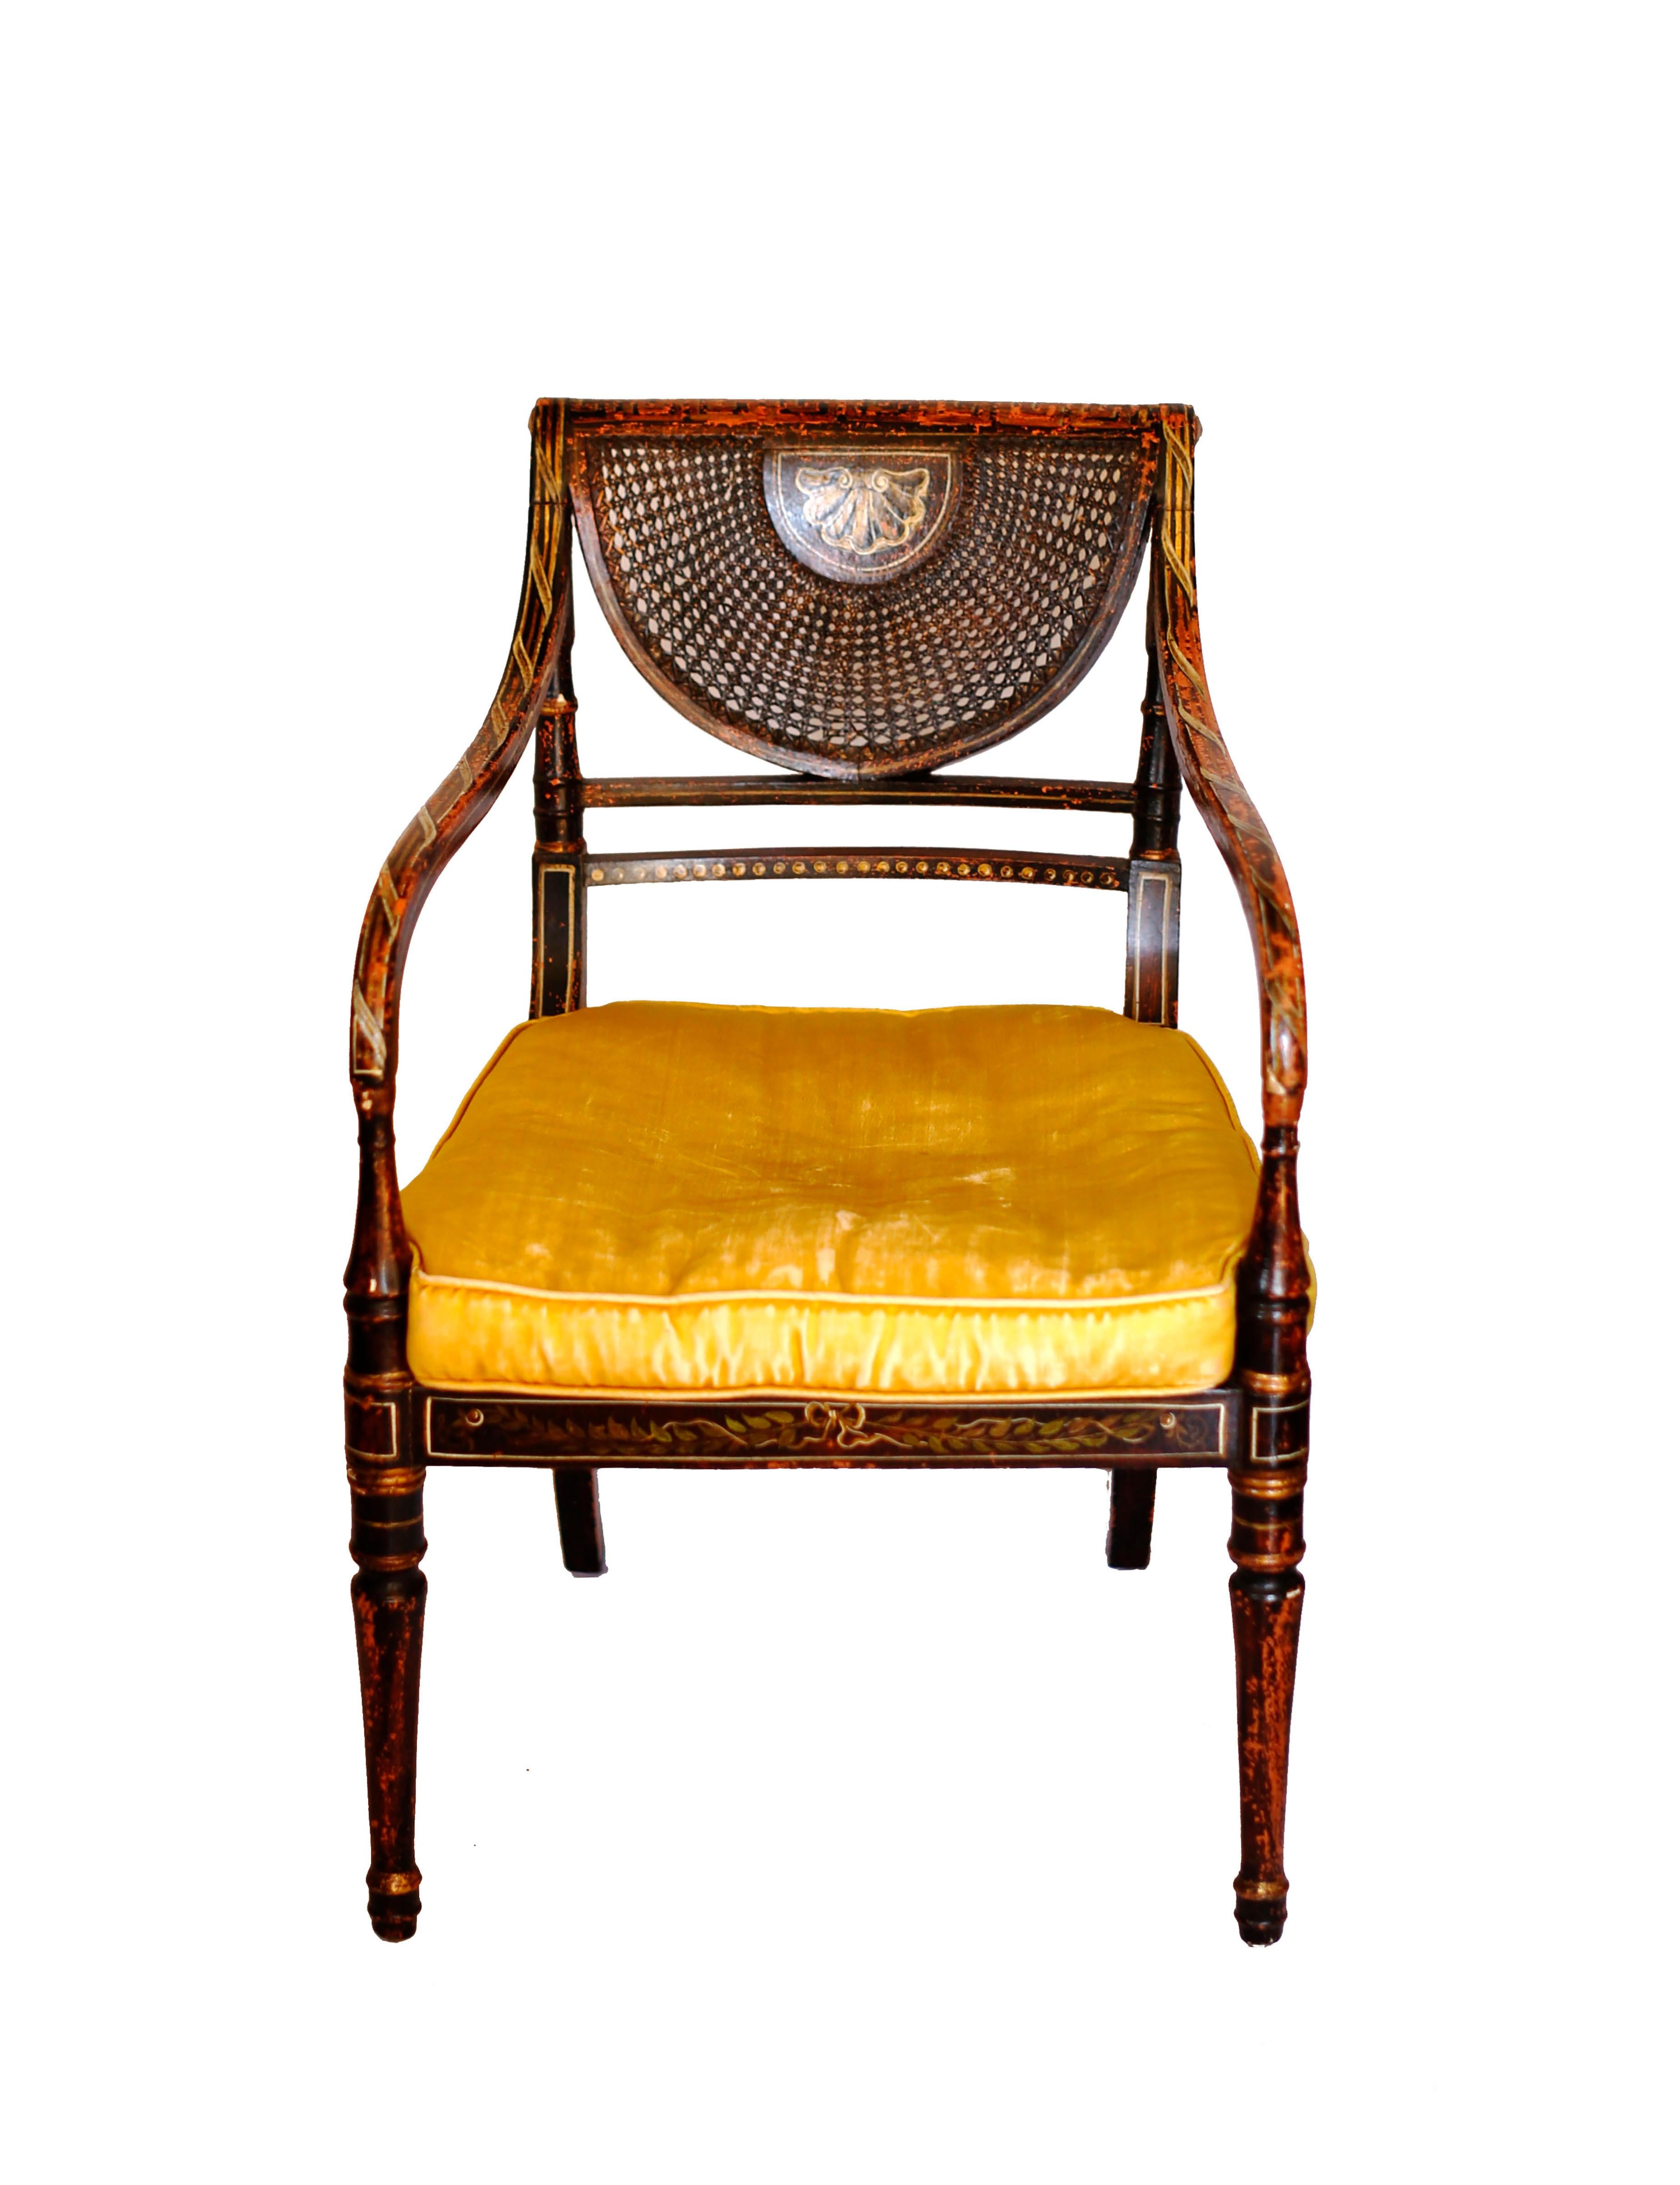 A beautiful period Hepplewhite style armchair with painted finishes and gilt detail. The painted surface reflects the influence of Swiss neoclassical painter Angelica Kauffman (1741-1807) with ribbons, garland, and Greek key motifs. The caned back